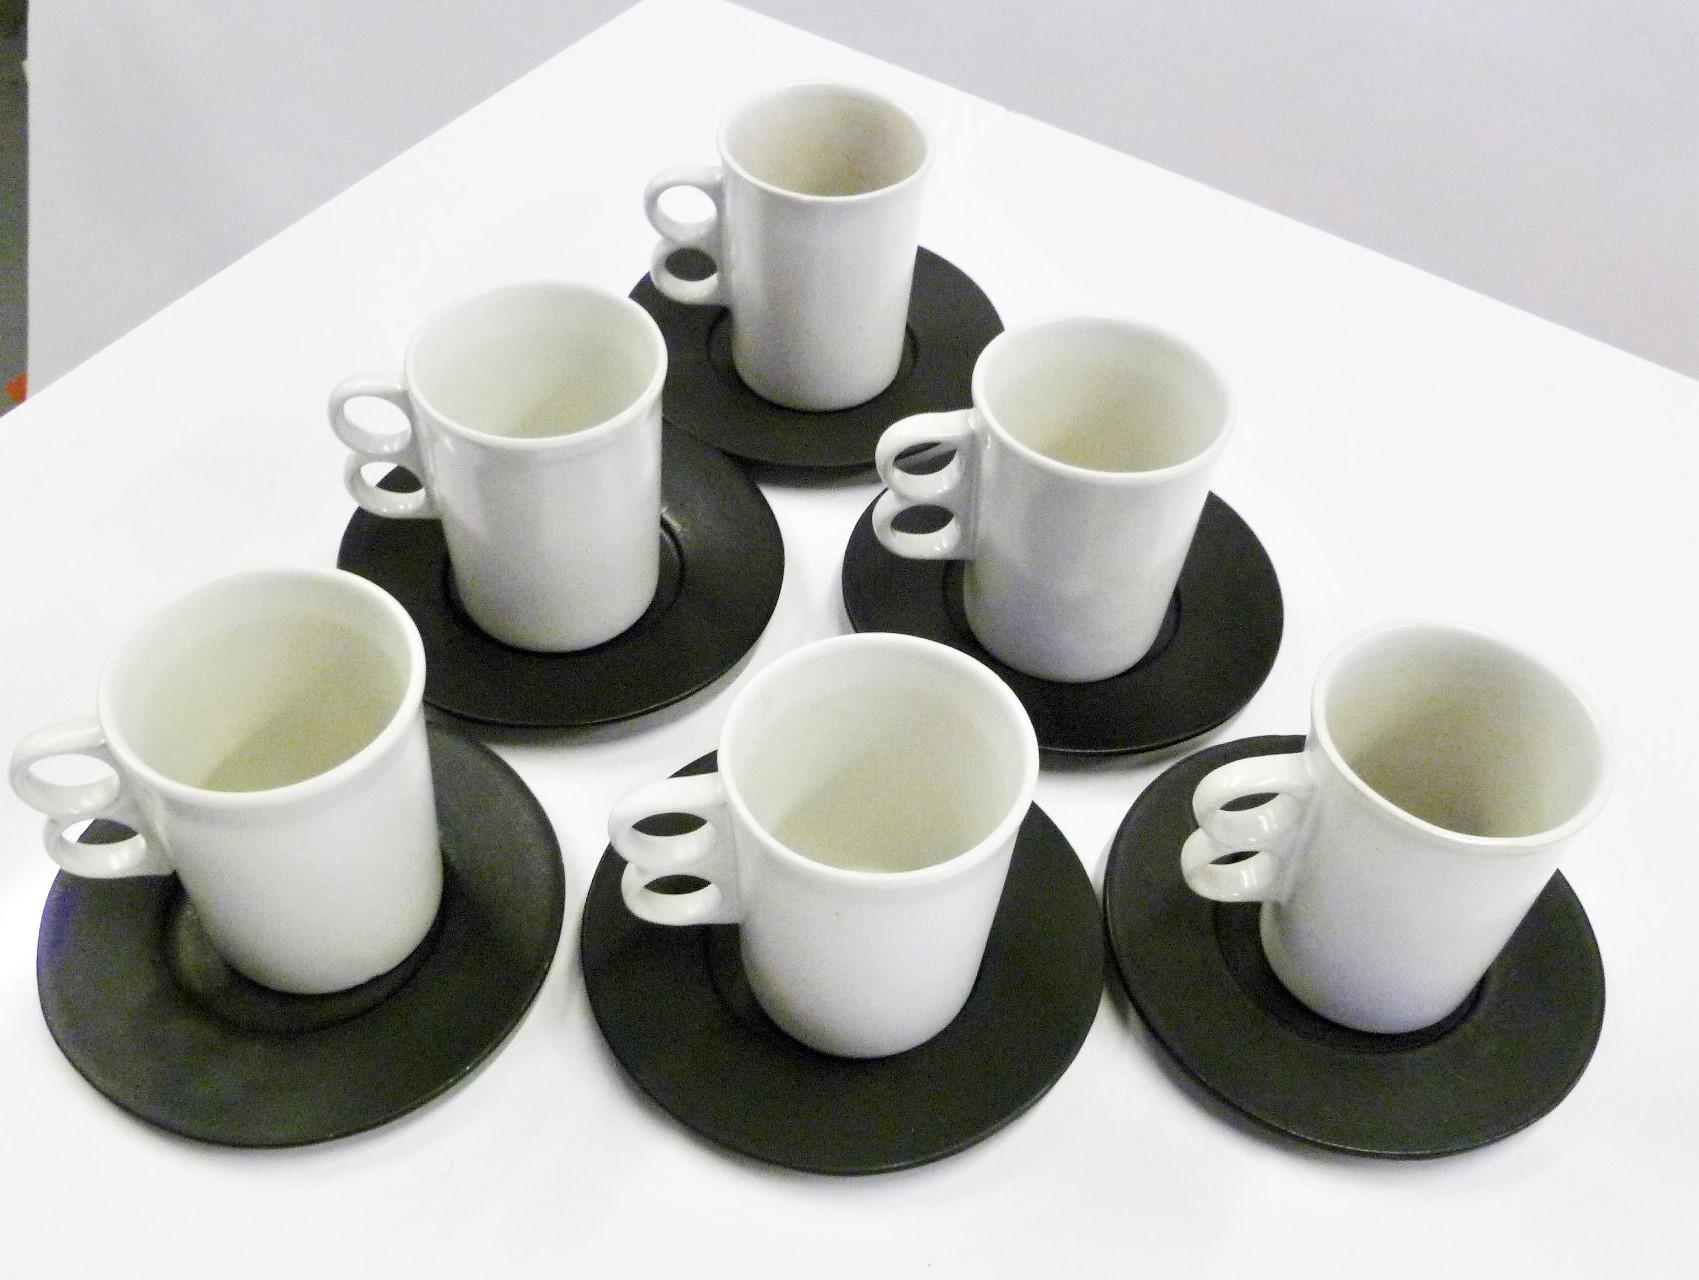 Designed by David Gil (1922-2002) for his company Bennington Potters of Vermont, a set of 6 matte white trigger mugs #1340 and 6 matte black plates/saucers. These are handmade stoneware pieces from the 1960s, each will be an individual creation thus